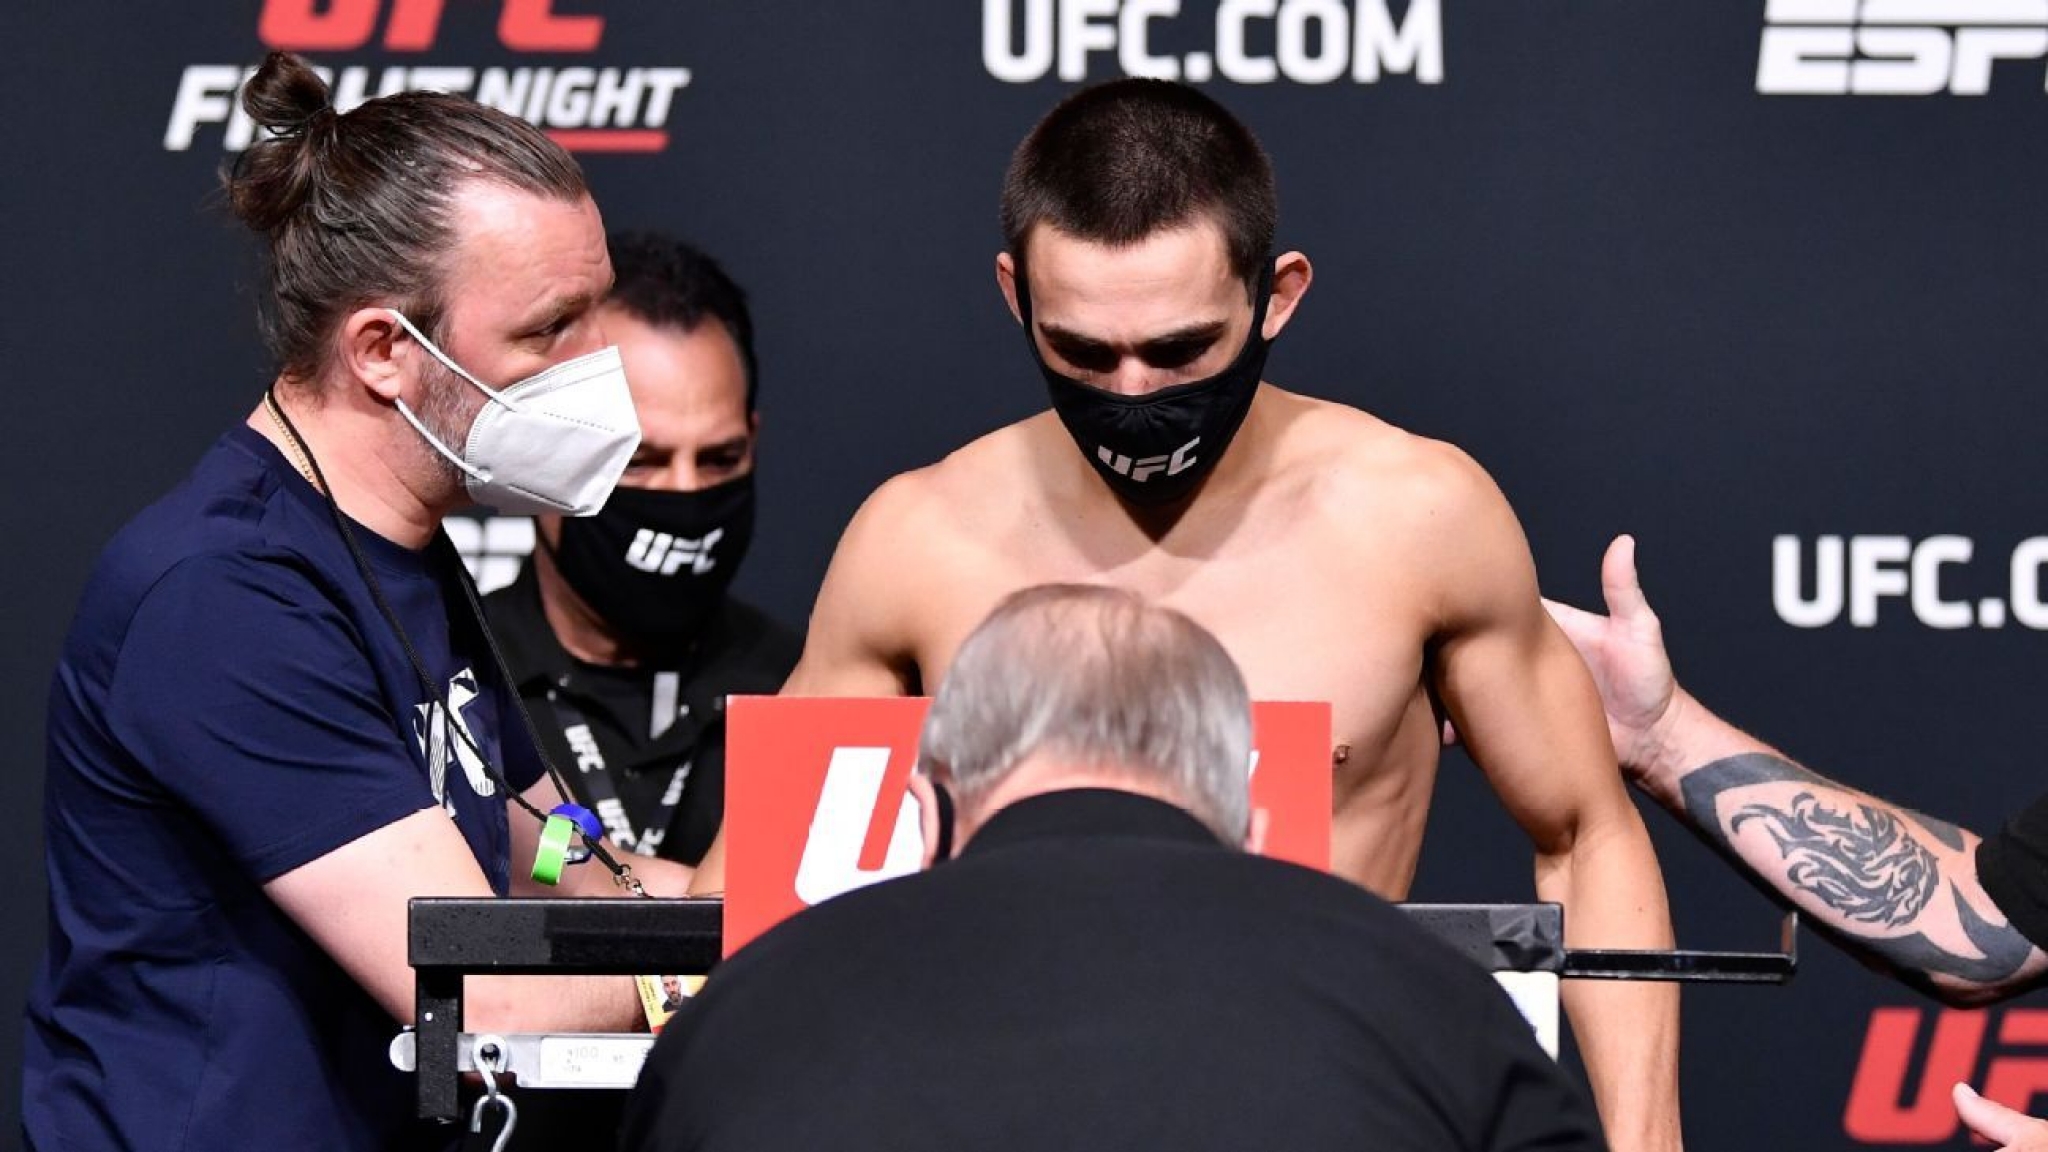 Benoit pulled from UFC card after shaky weigh-in